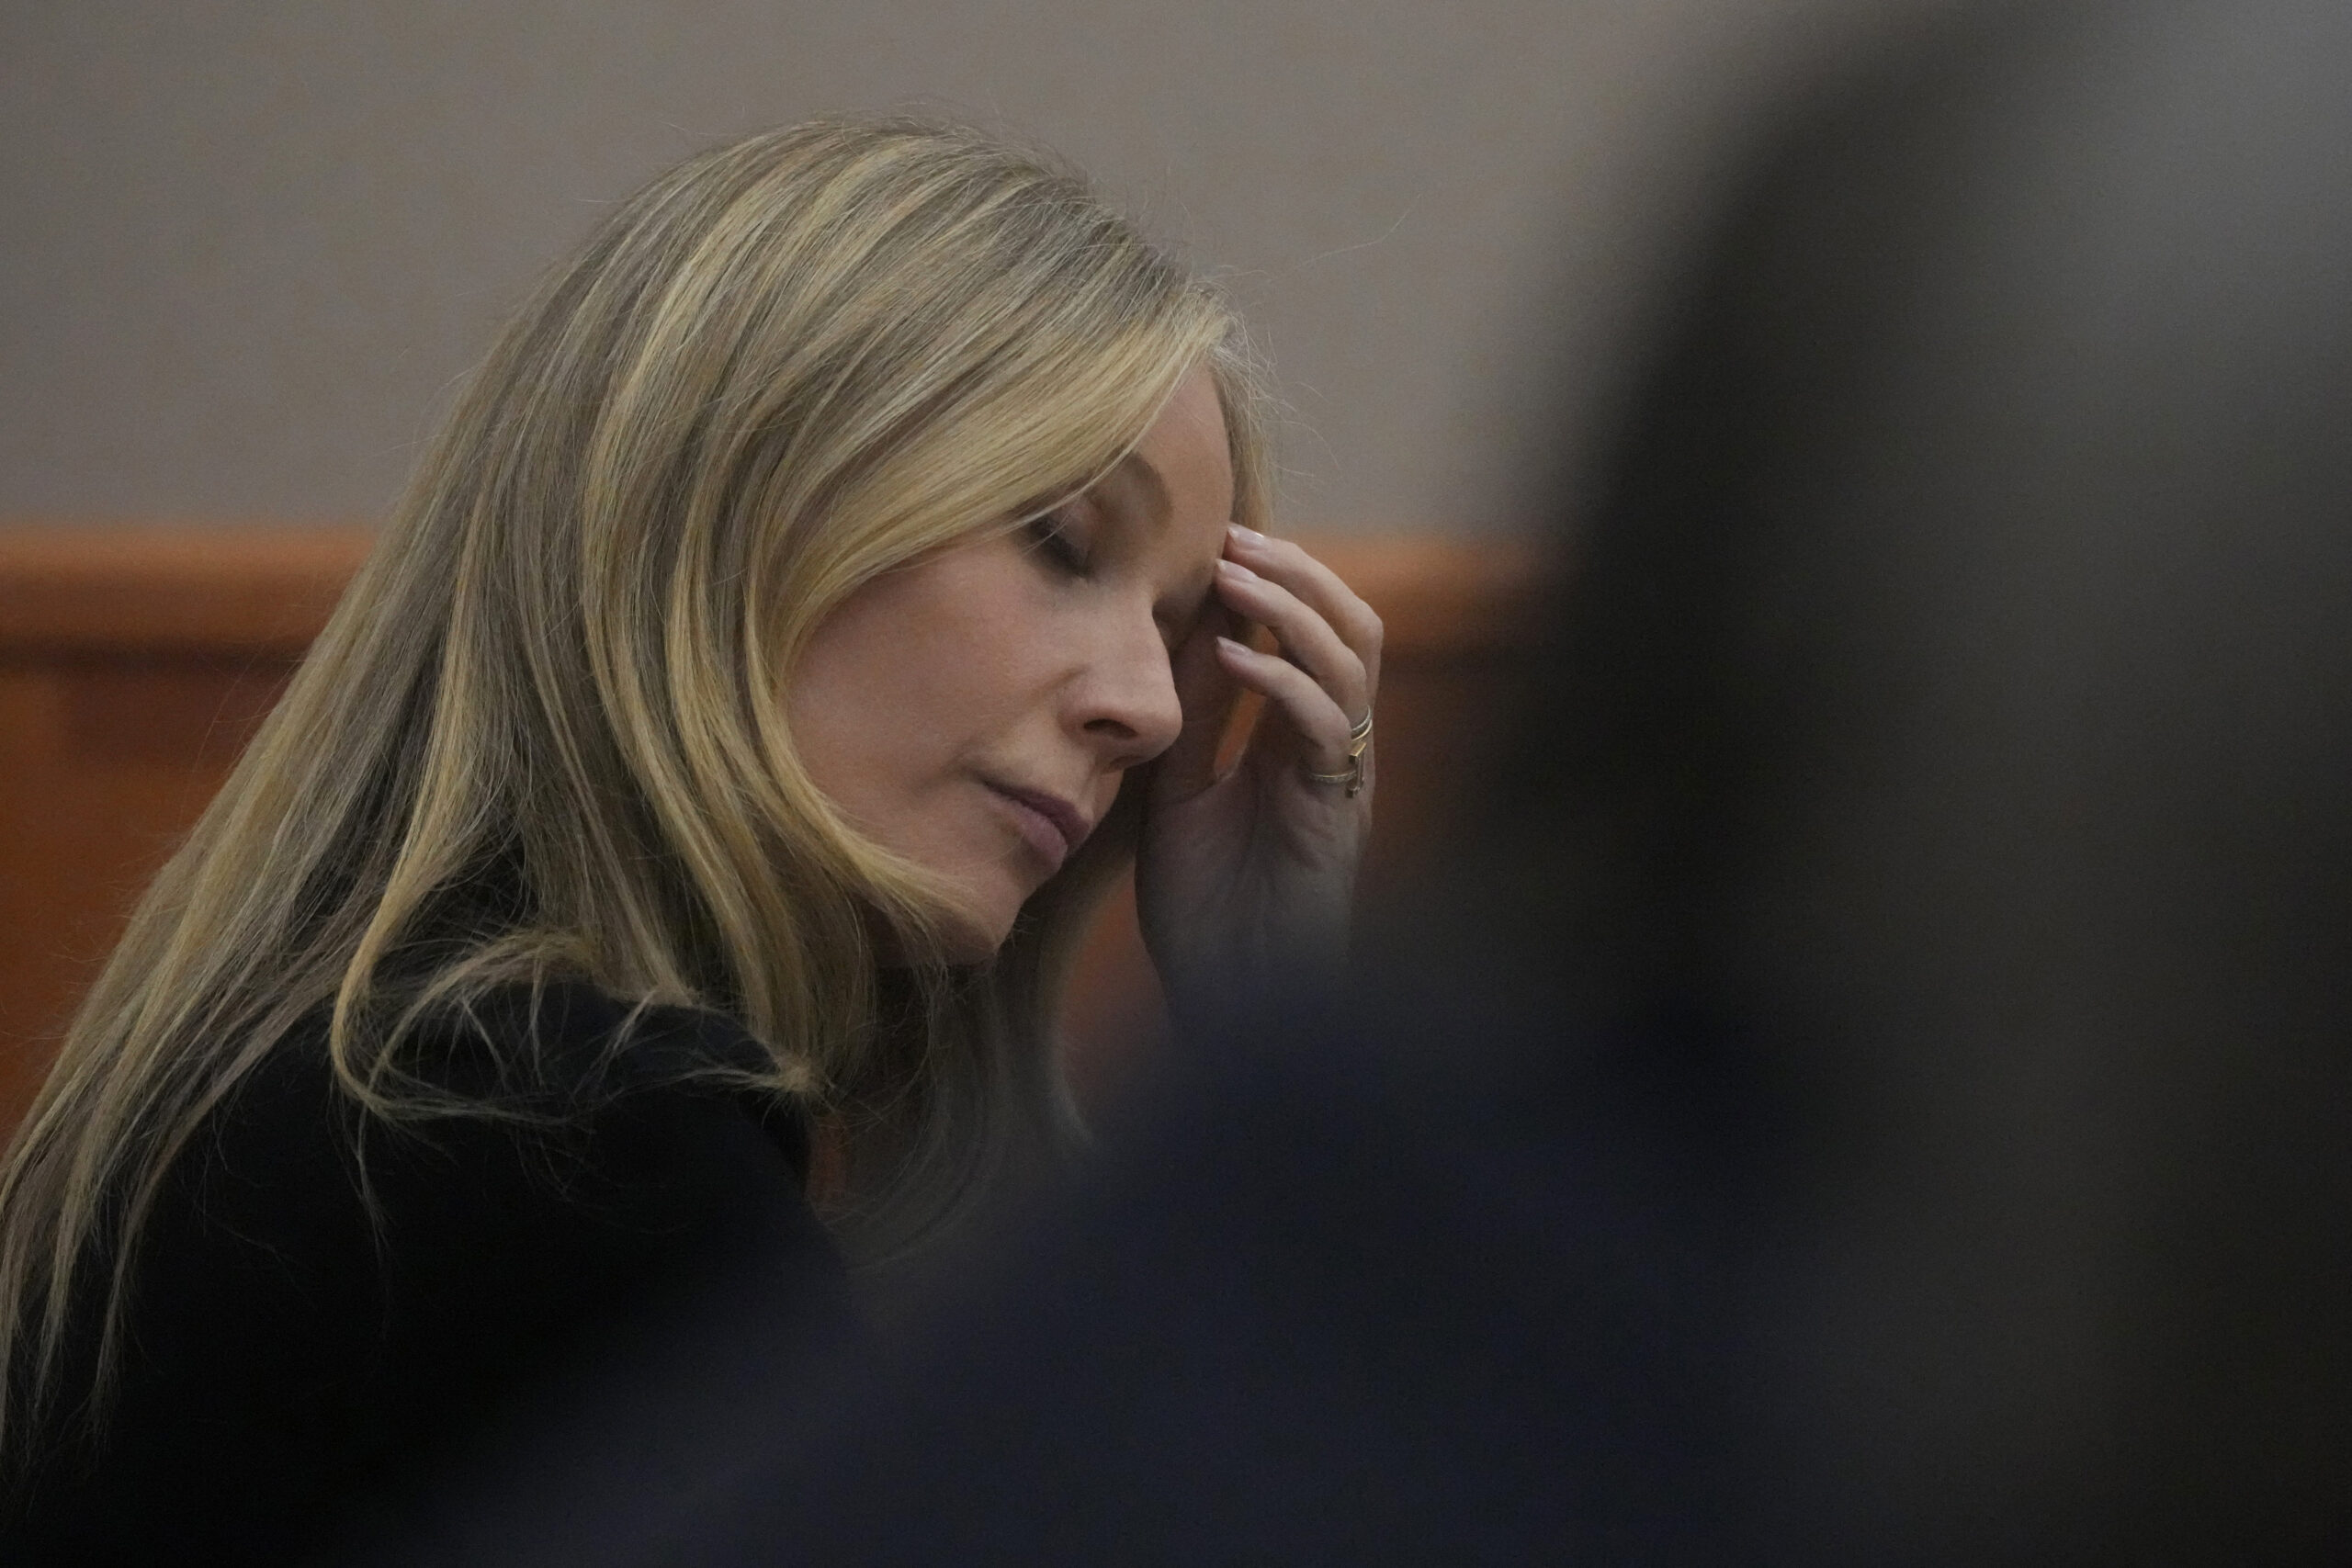 Lawyers for the man suing Gwyneth Paltrow over an accident on a swanky US ski slope say the actress should give him almost $3.3 million for his suffering.